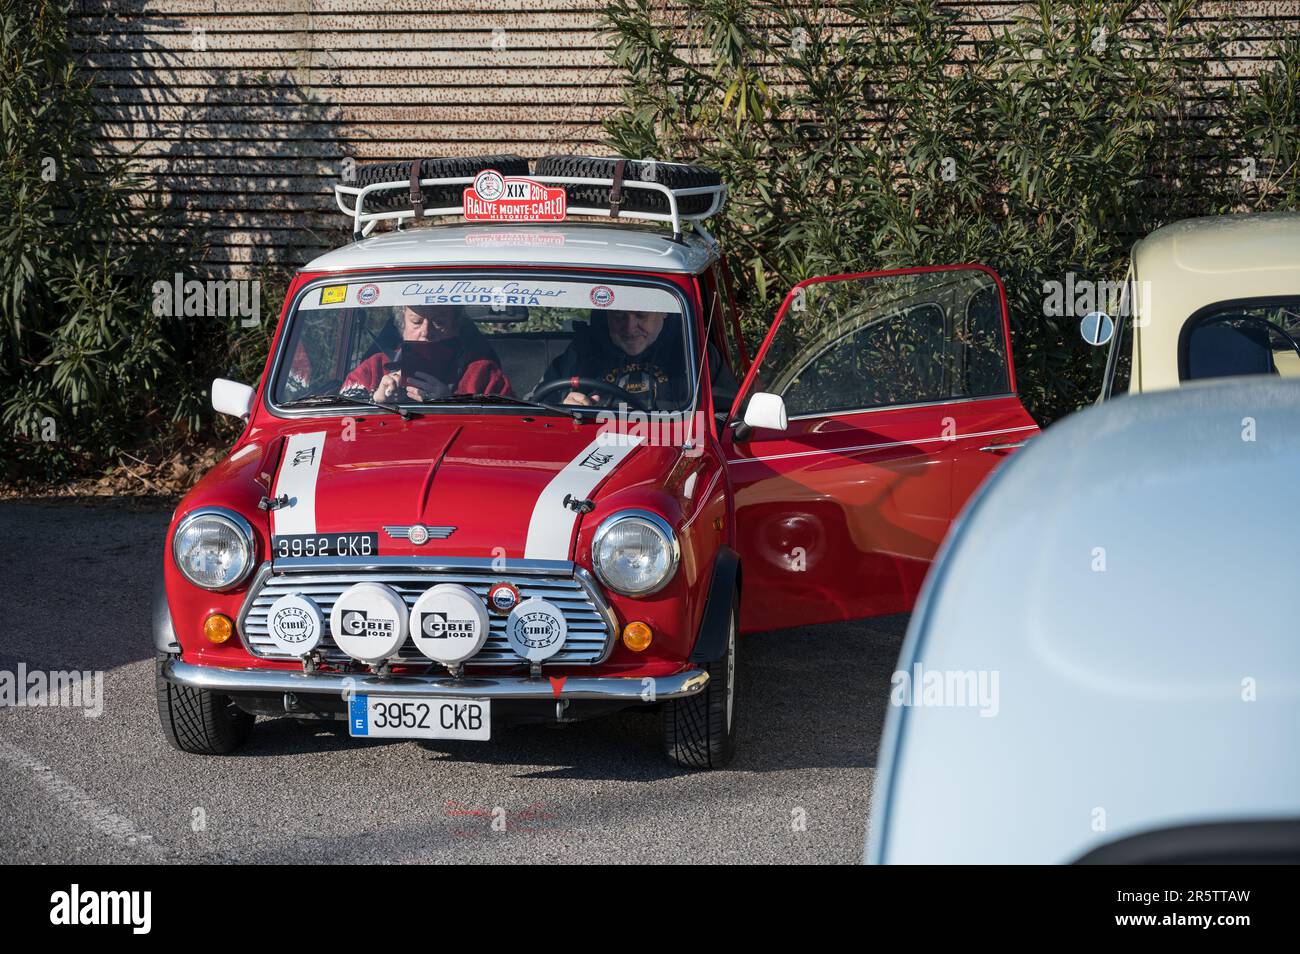 The front view of the classic rally Mini Cooper on the street Stock Photo